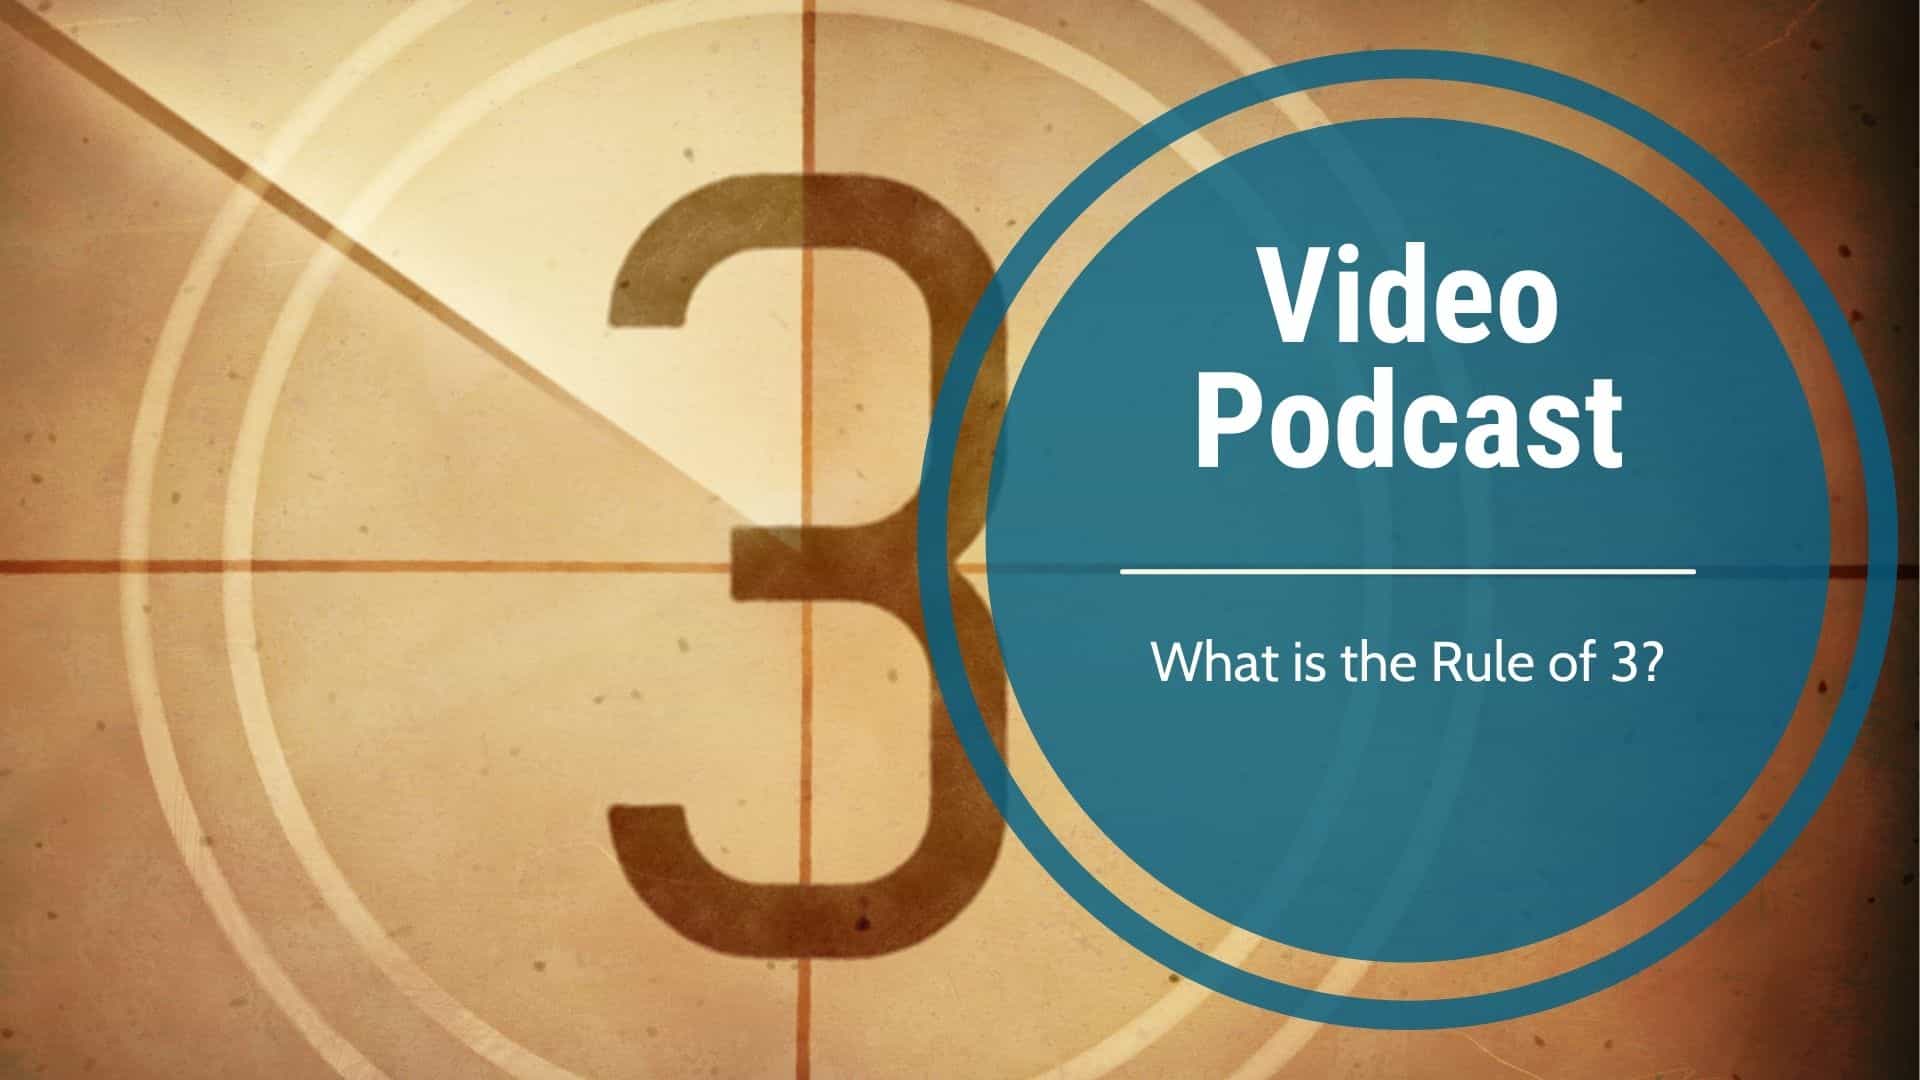 Video Podcast: What is the Rule of 3?